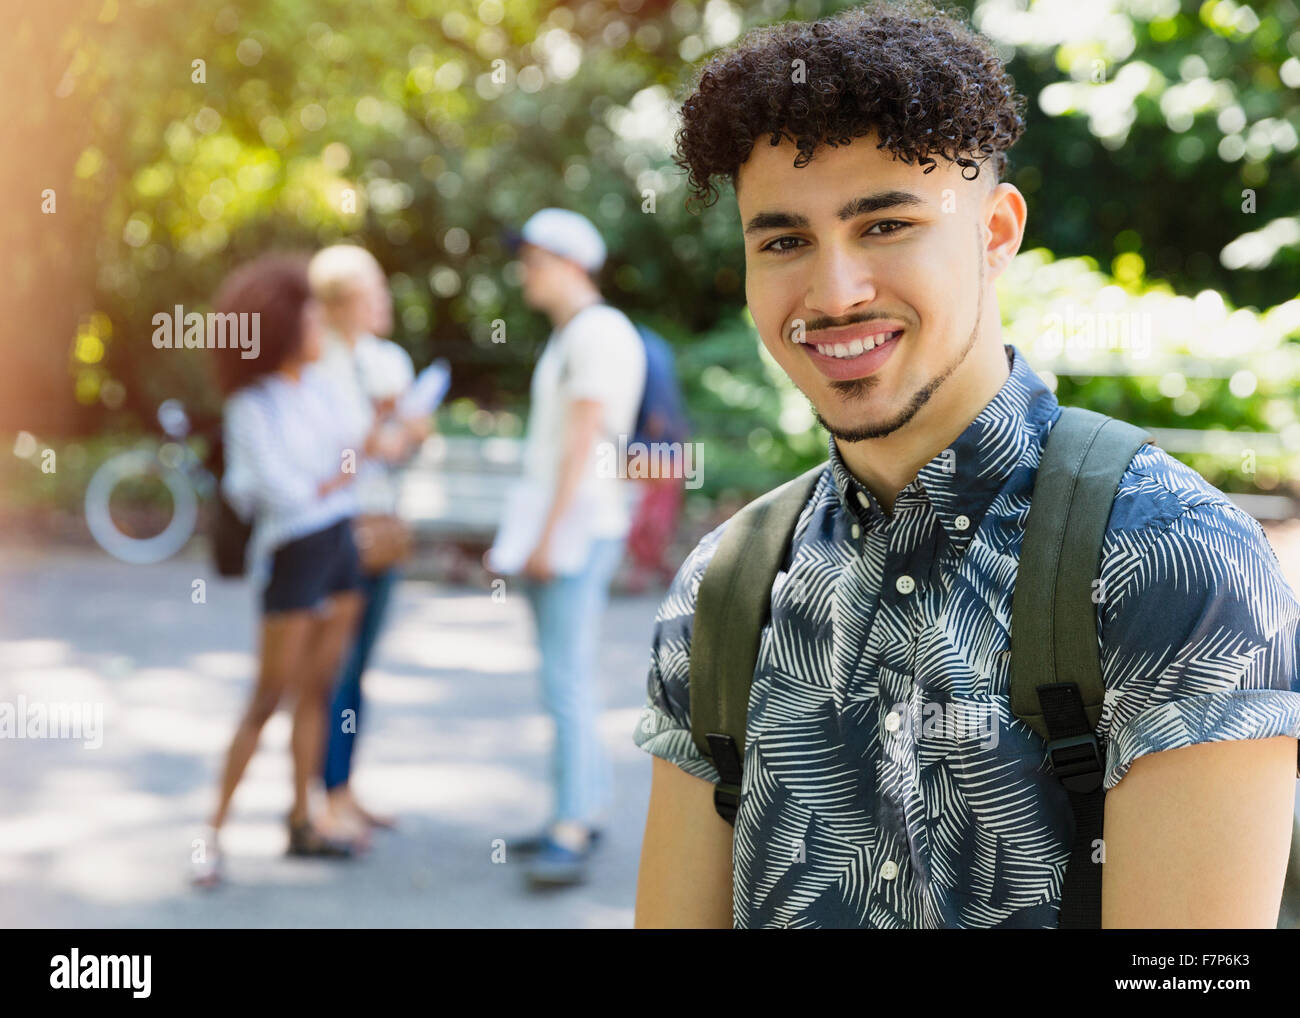 Portrait smiling man with curly black hair in park Stock Photo